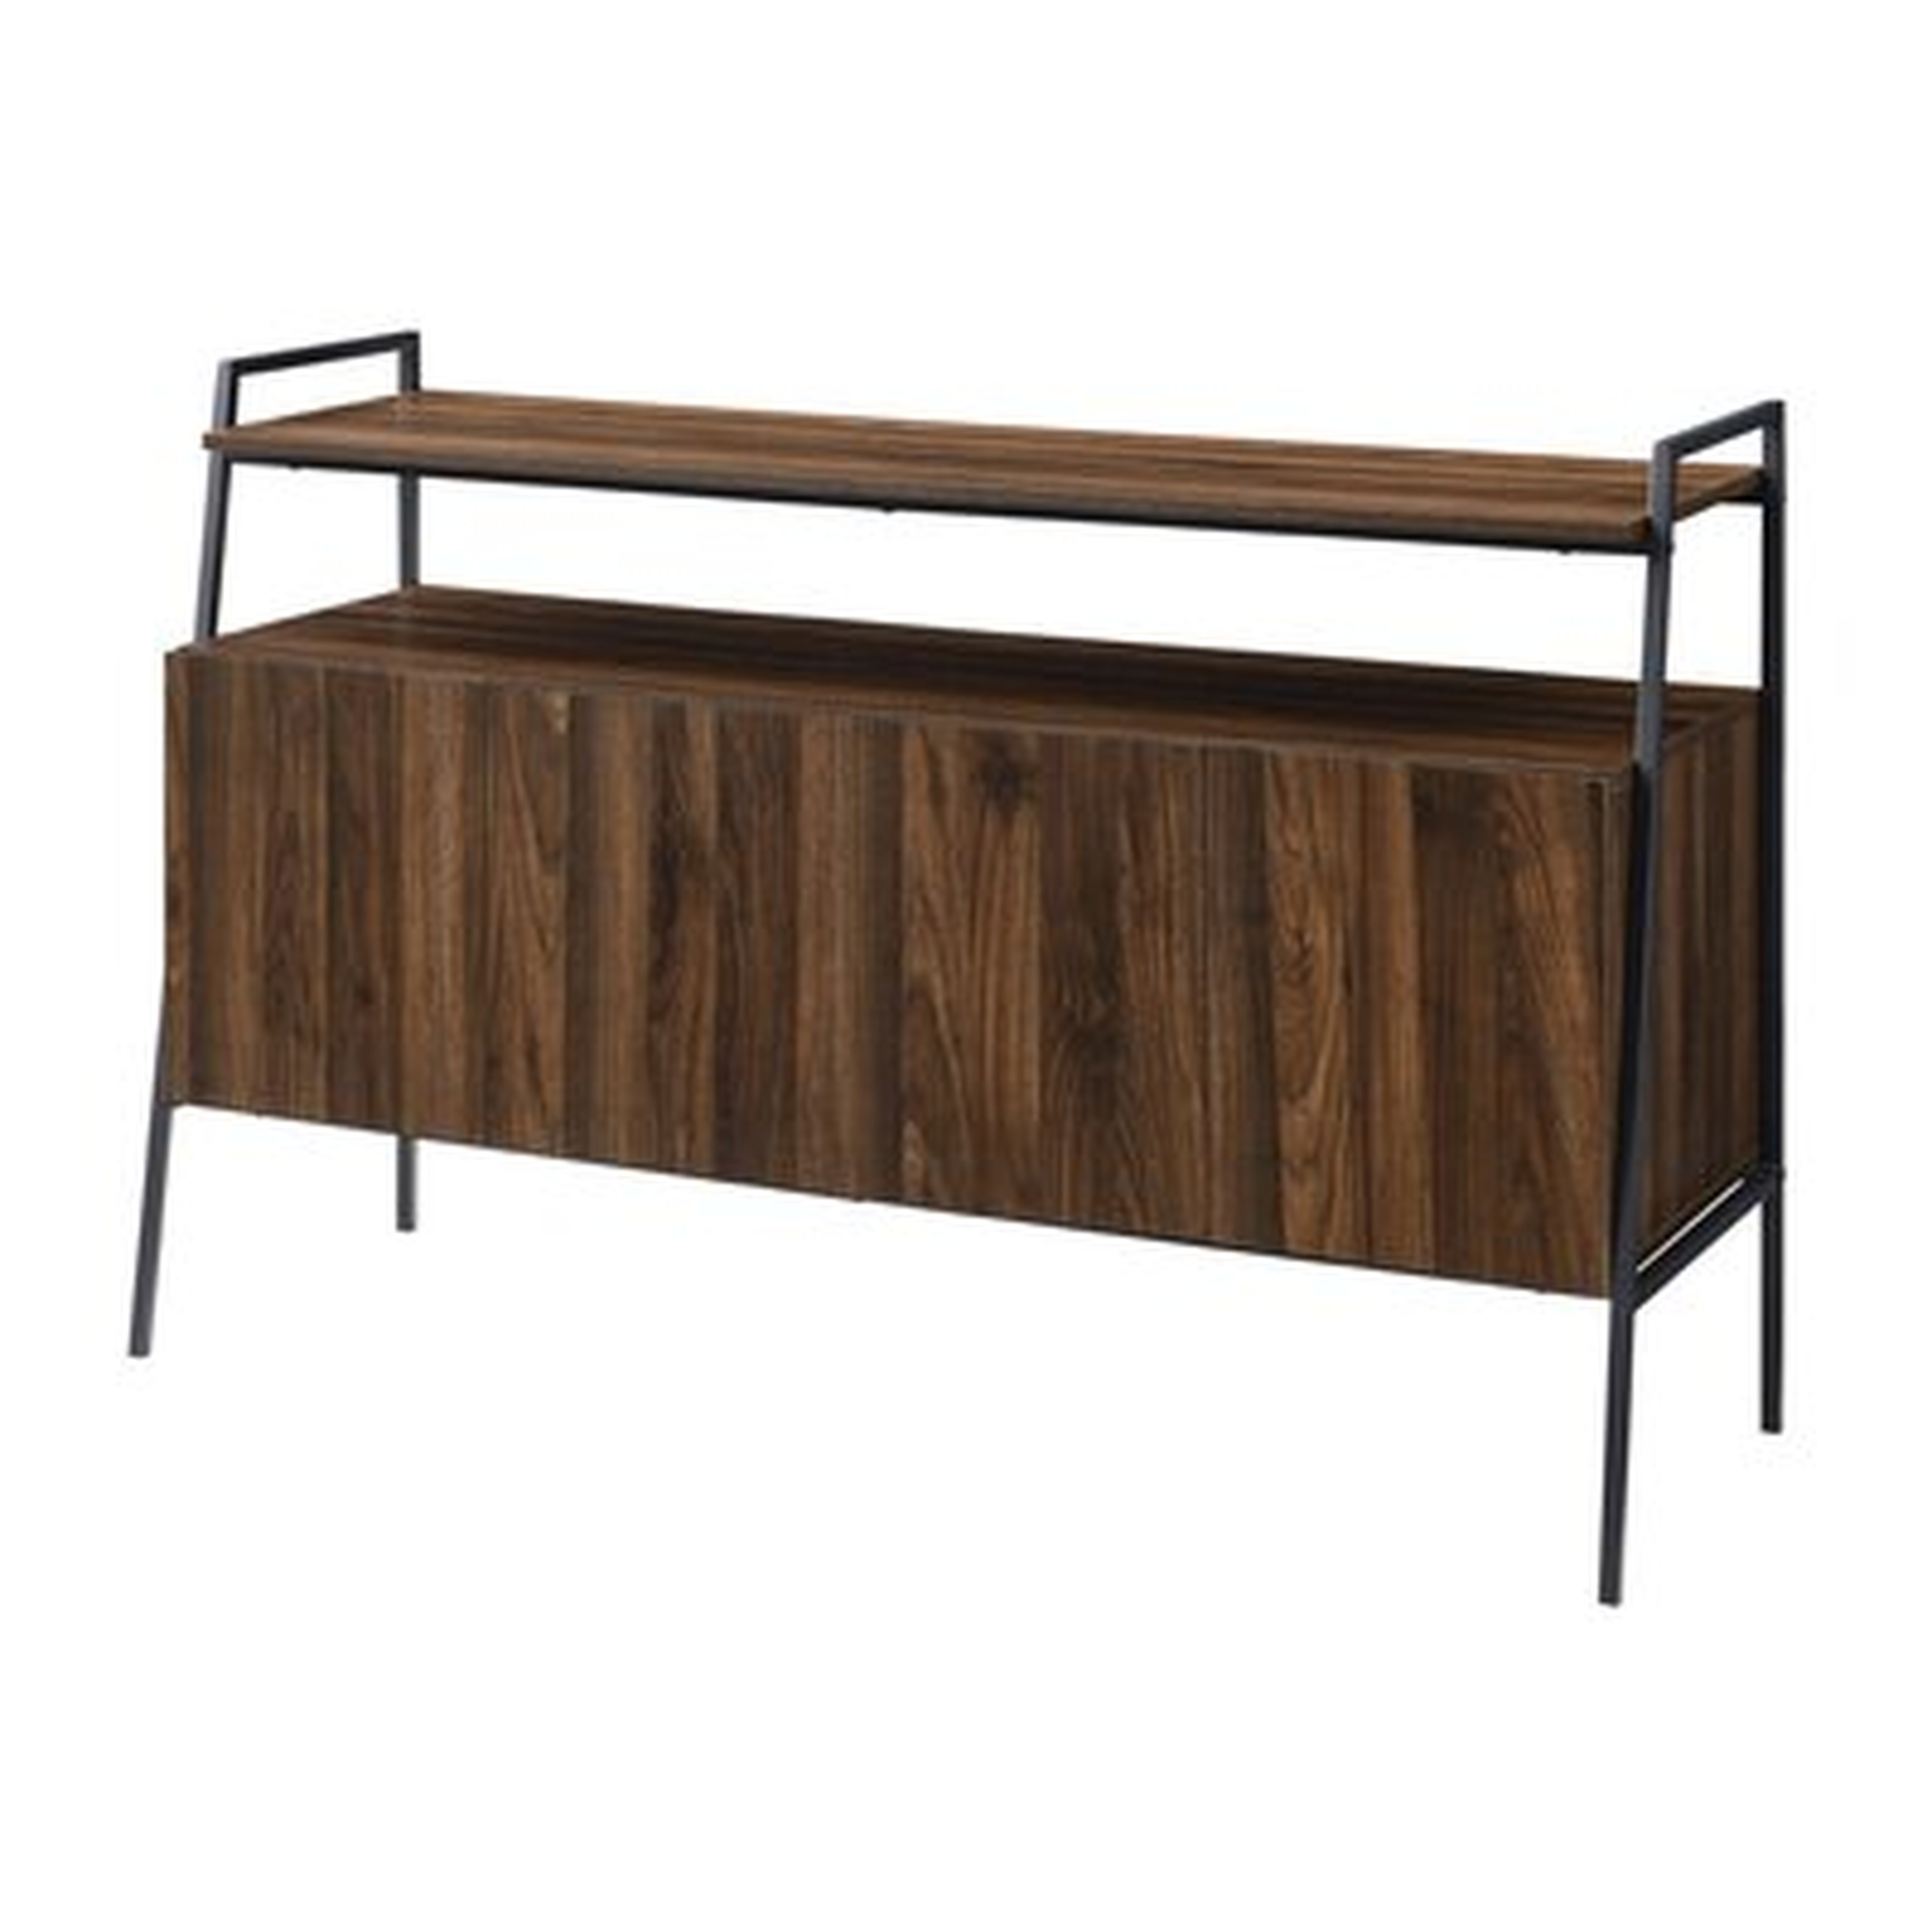 Diego TV Stand for TVs up to 58" (est. mar 9) - Wayfair